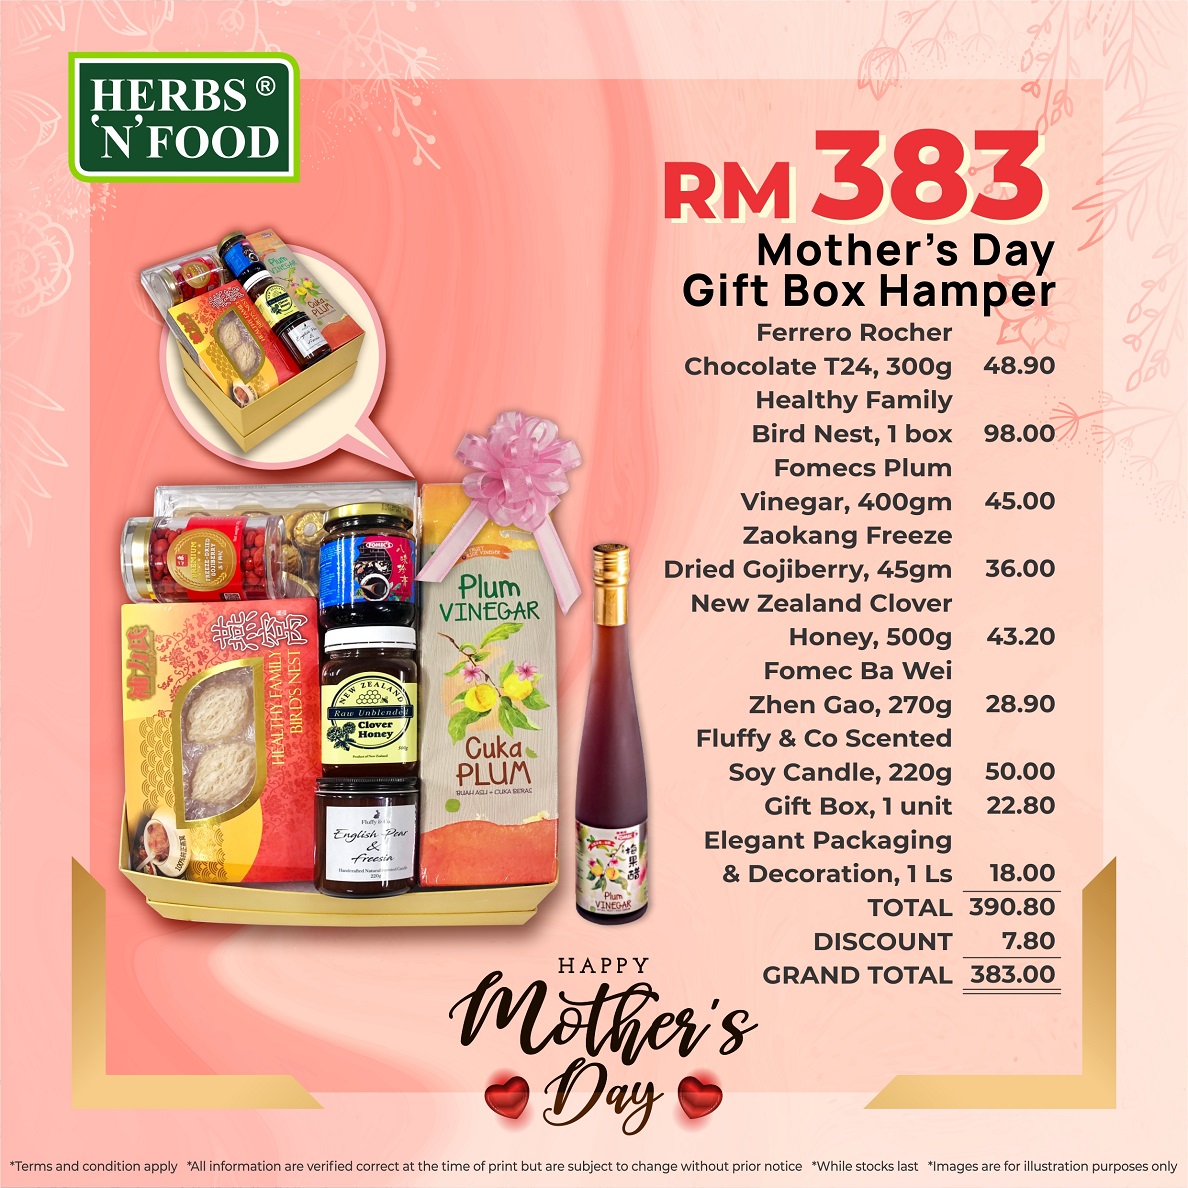 MOTHER’S DAY GIFT BOX HAMPER RM383